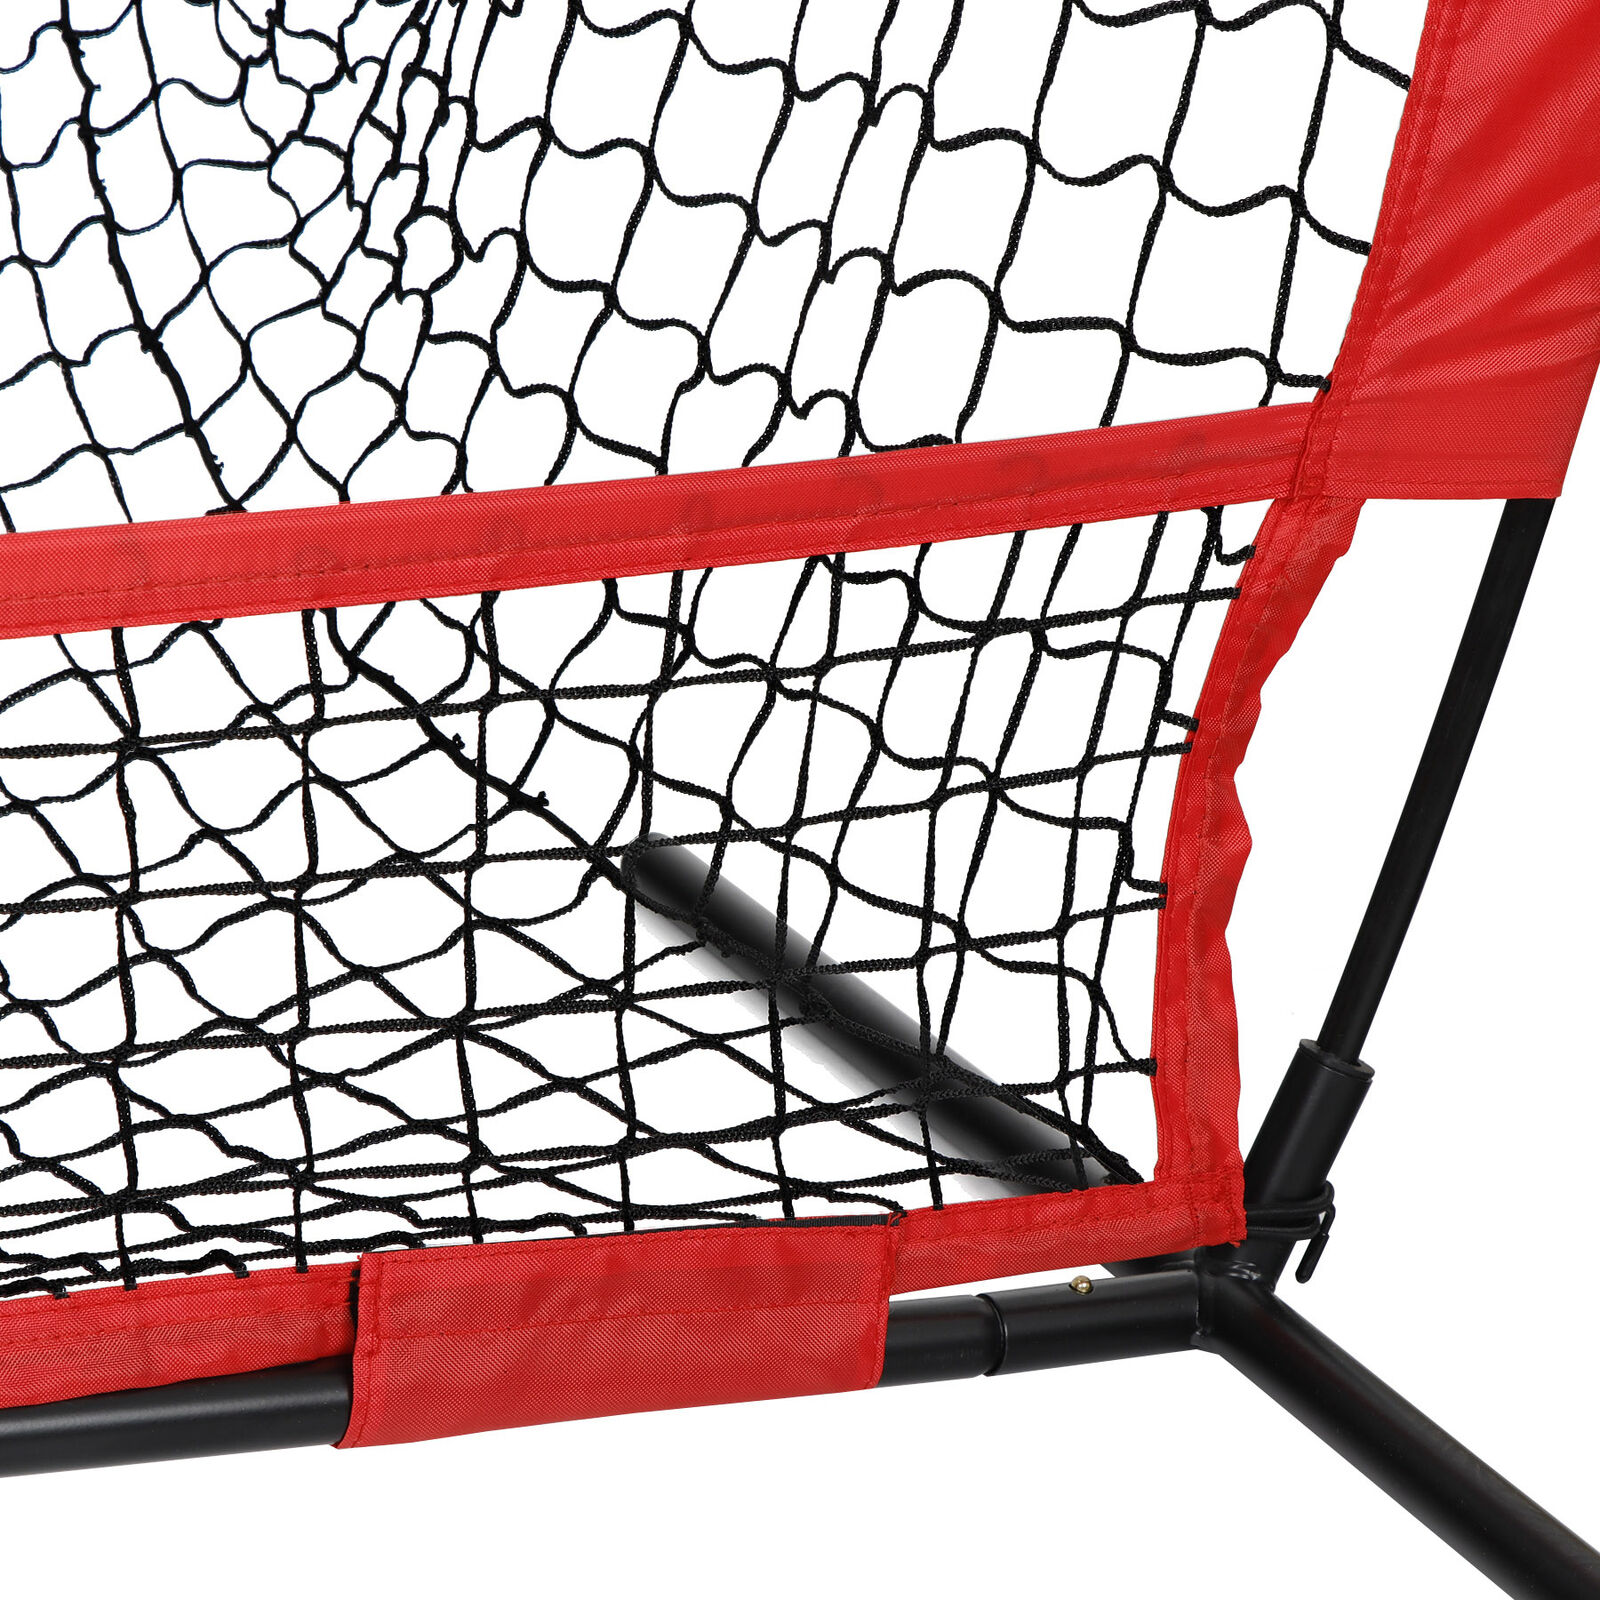 ZenStyle Portable 5 Ft. x 5 Ft. Baseball Softball Practice Net Hitting Pitching Batting Training Net with Carry Bag - image 4 of 10